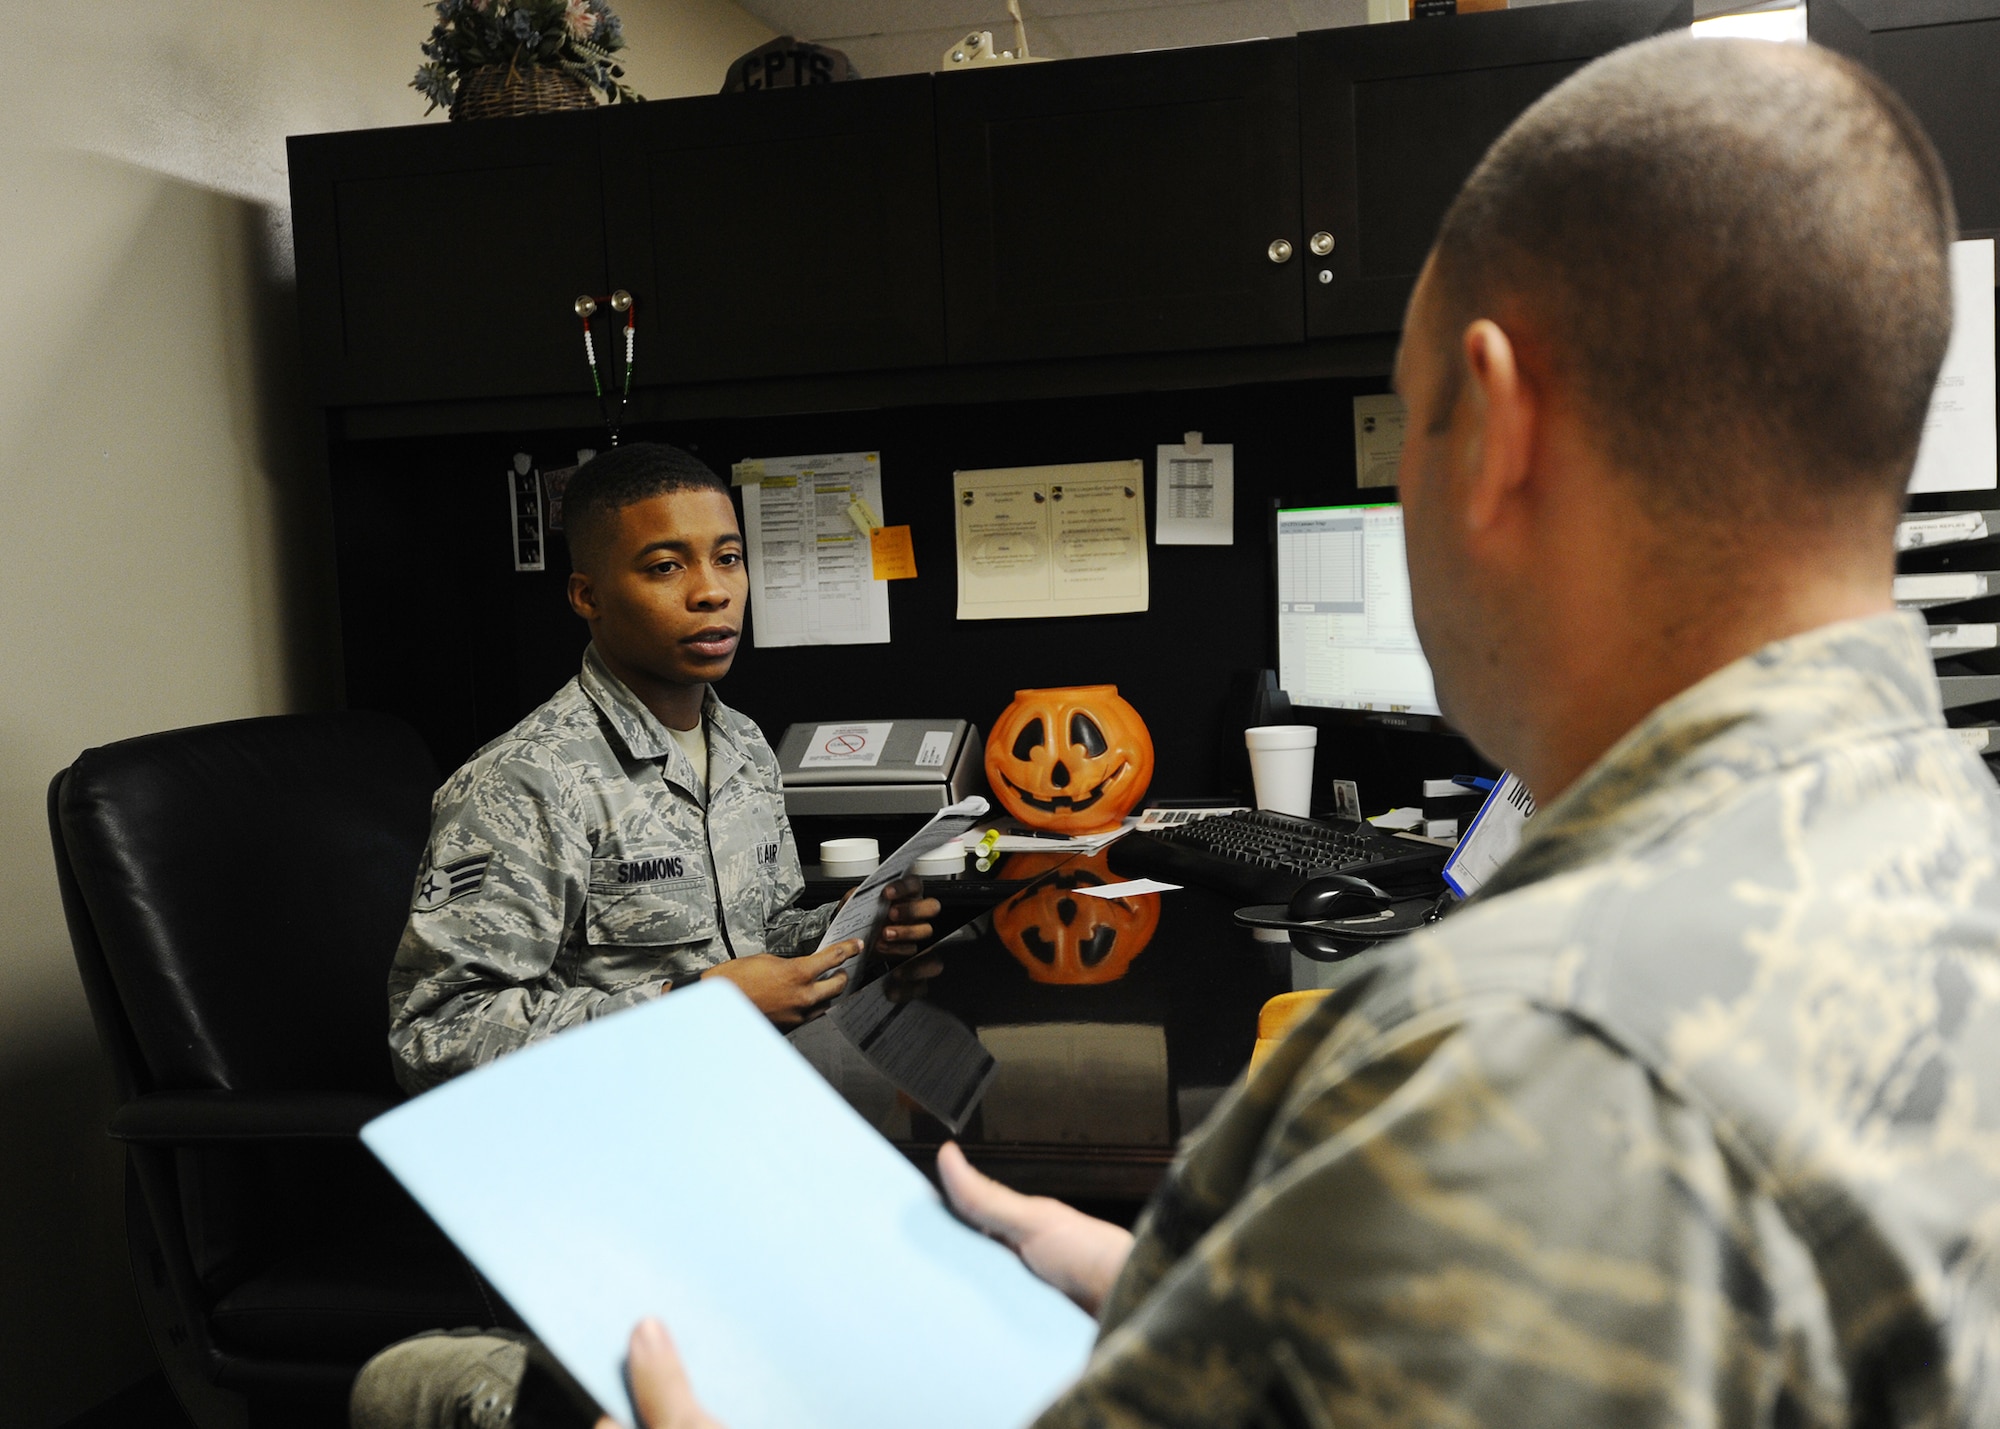 Senior Airman Mathan Simmons, 325th Comptroller Squadron financial services technician, assists and briefs an Airman before his deployment to an overseas location Nov. 25 at the Base Support Center. The Customer Support section manages the Defense Travel System, is responsible for leave management, and acts as the intermediary for non-DTS travel voucher computation serviced by the Air Force Financial Services Center. (U.S. Air Force photo by Senior Airman Ty-Rico Lea/Released)